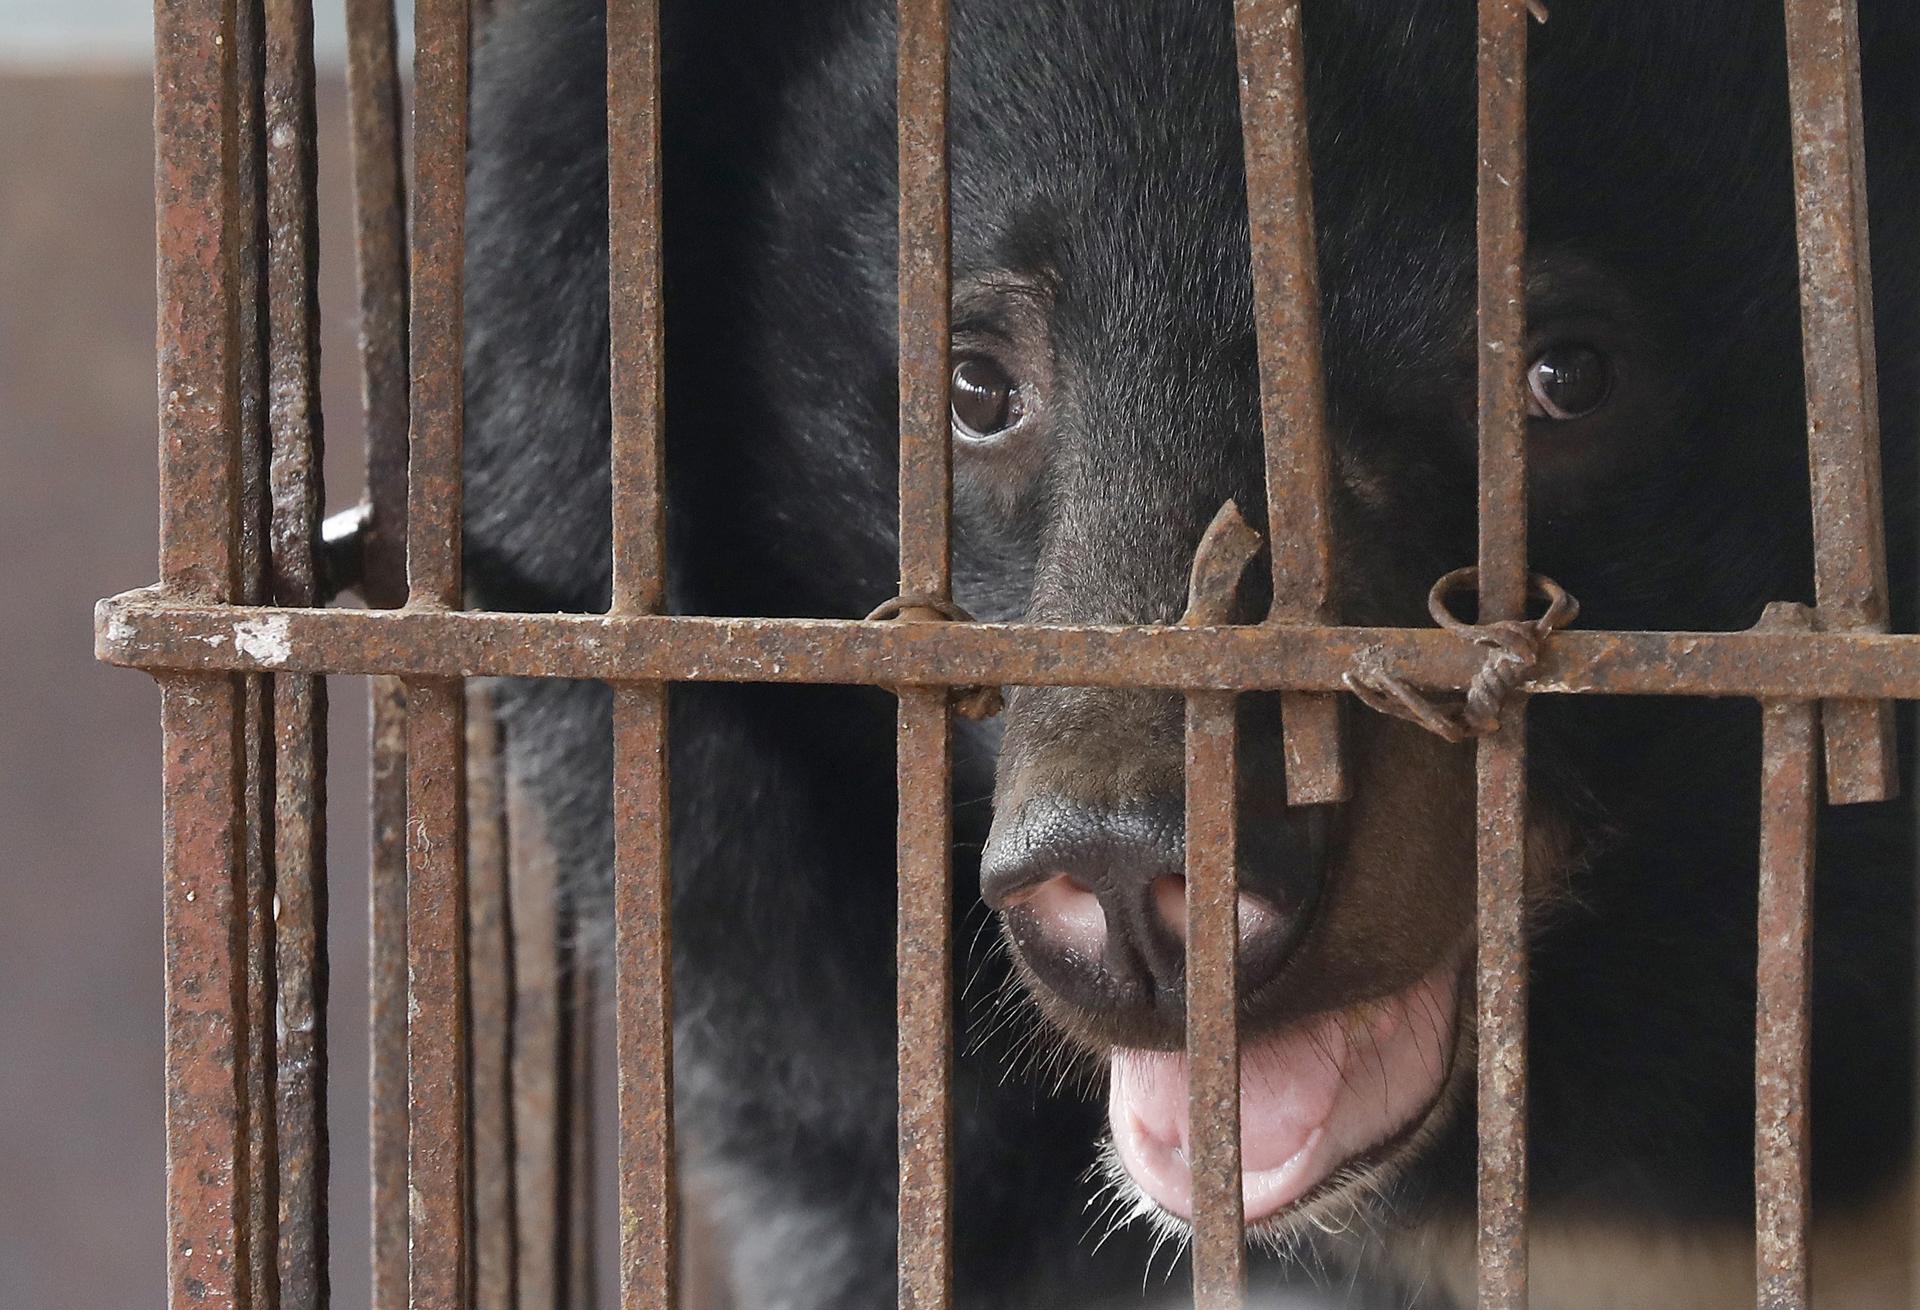 Breeze, a bear in captivity since 2005, upon arrival to the Vietnam bear rescue centre in Tam Dao national park, about 70 kilometers from Hanoi, Vietnam, 10 March 2023. EFE/EPA/LUONG THAI LINH